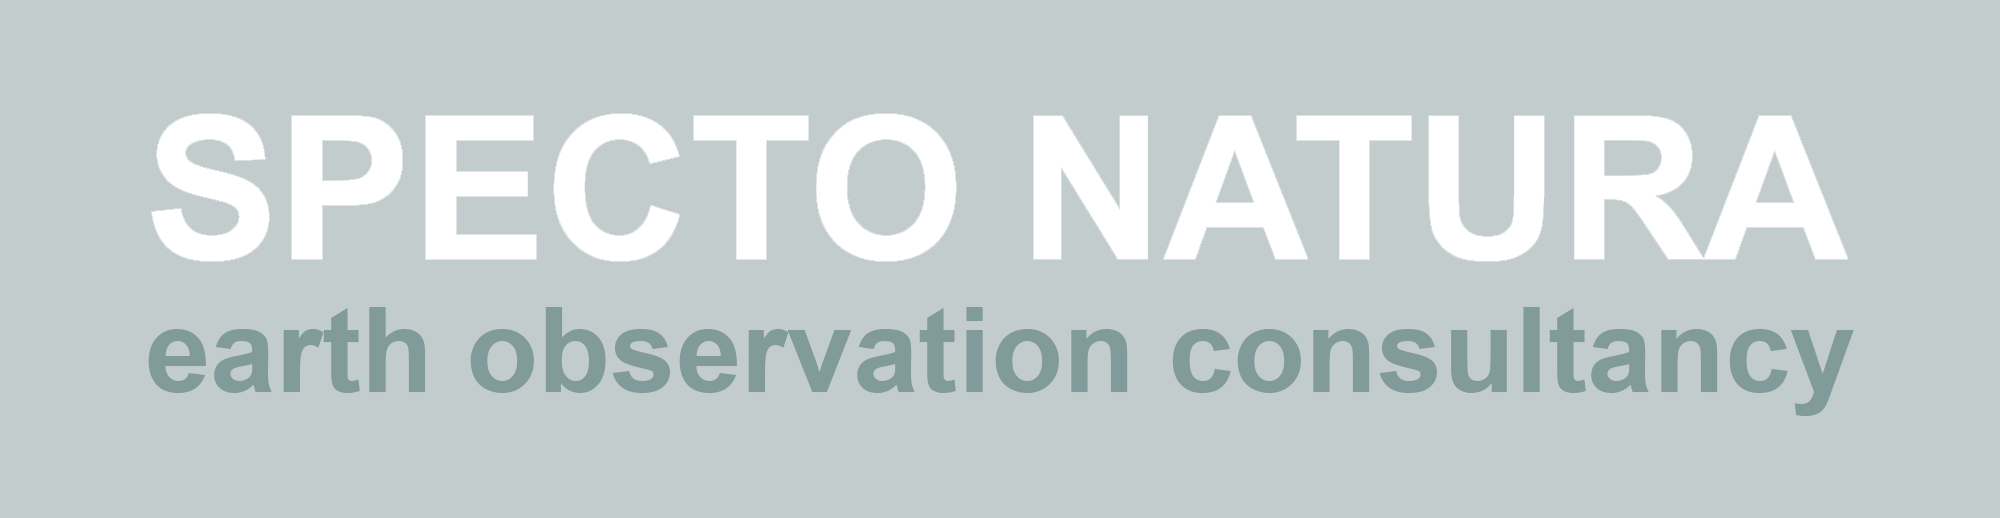 Specto Natura Earth Observation Consultancy